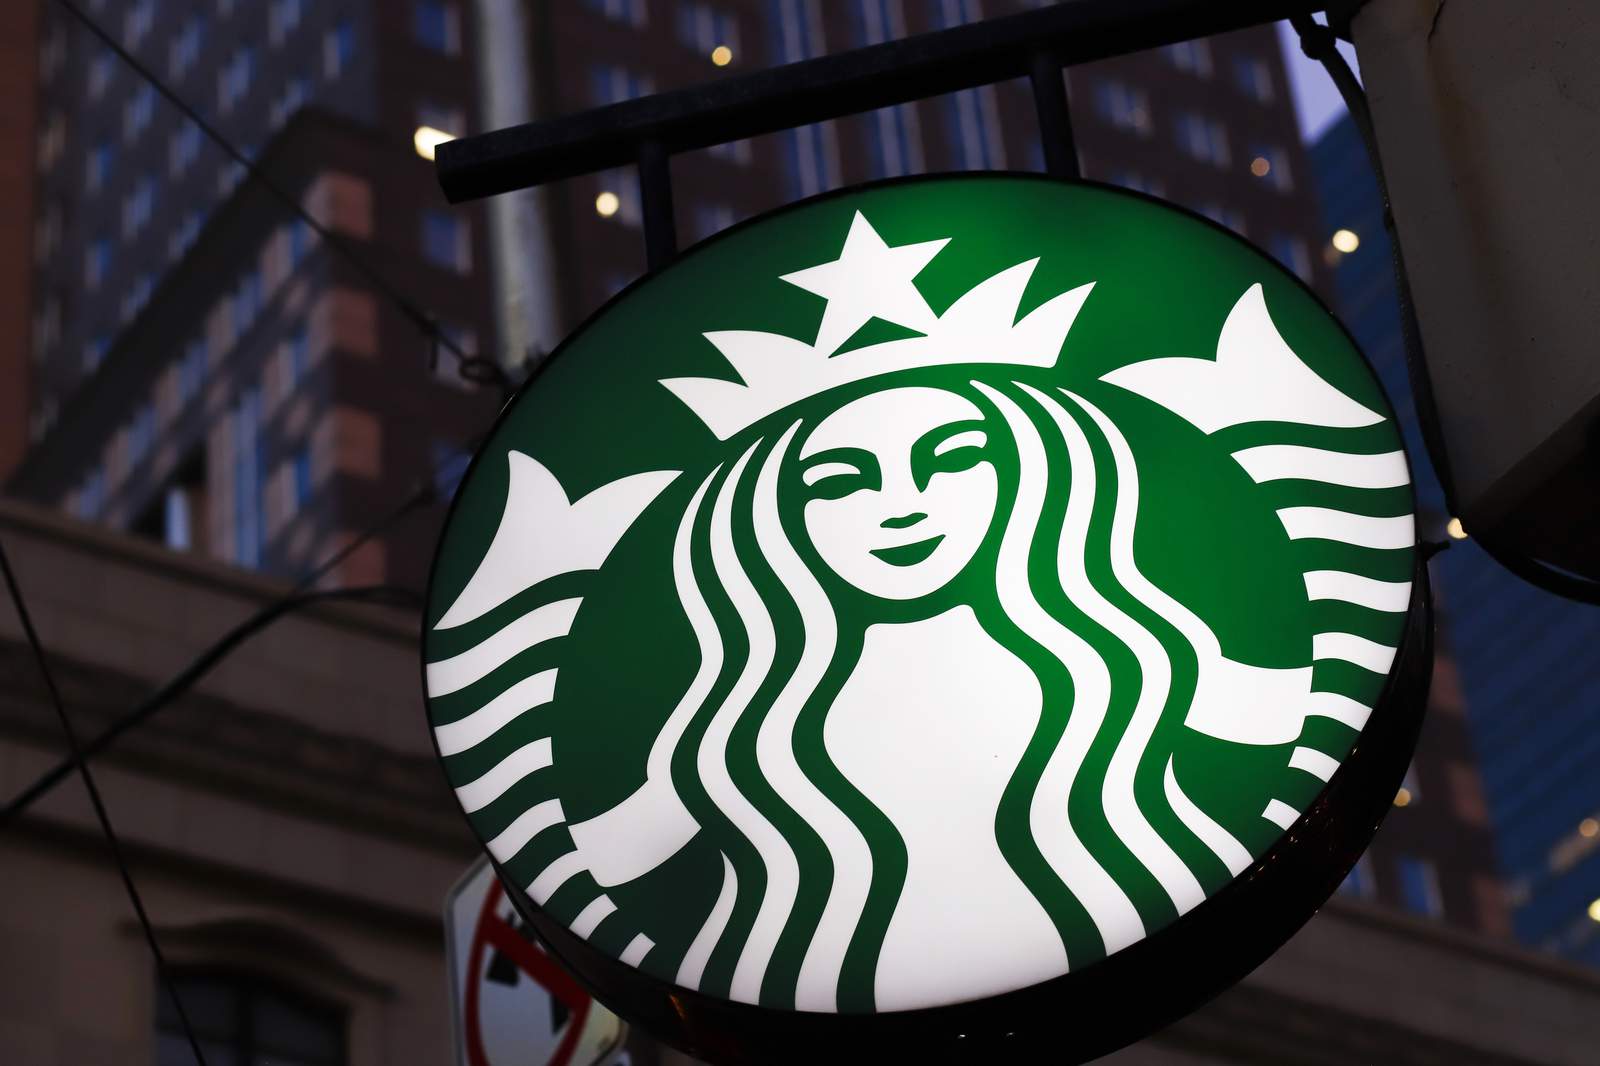 Starbucks is giving away a free cup of coffee to frontline workers now through Dec. 31